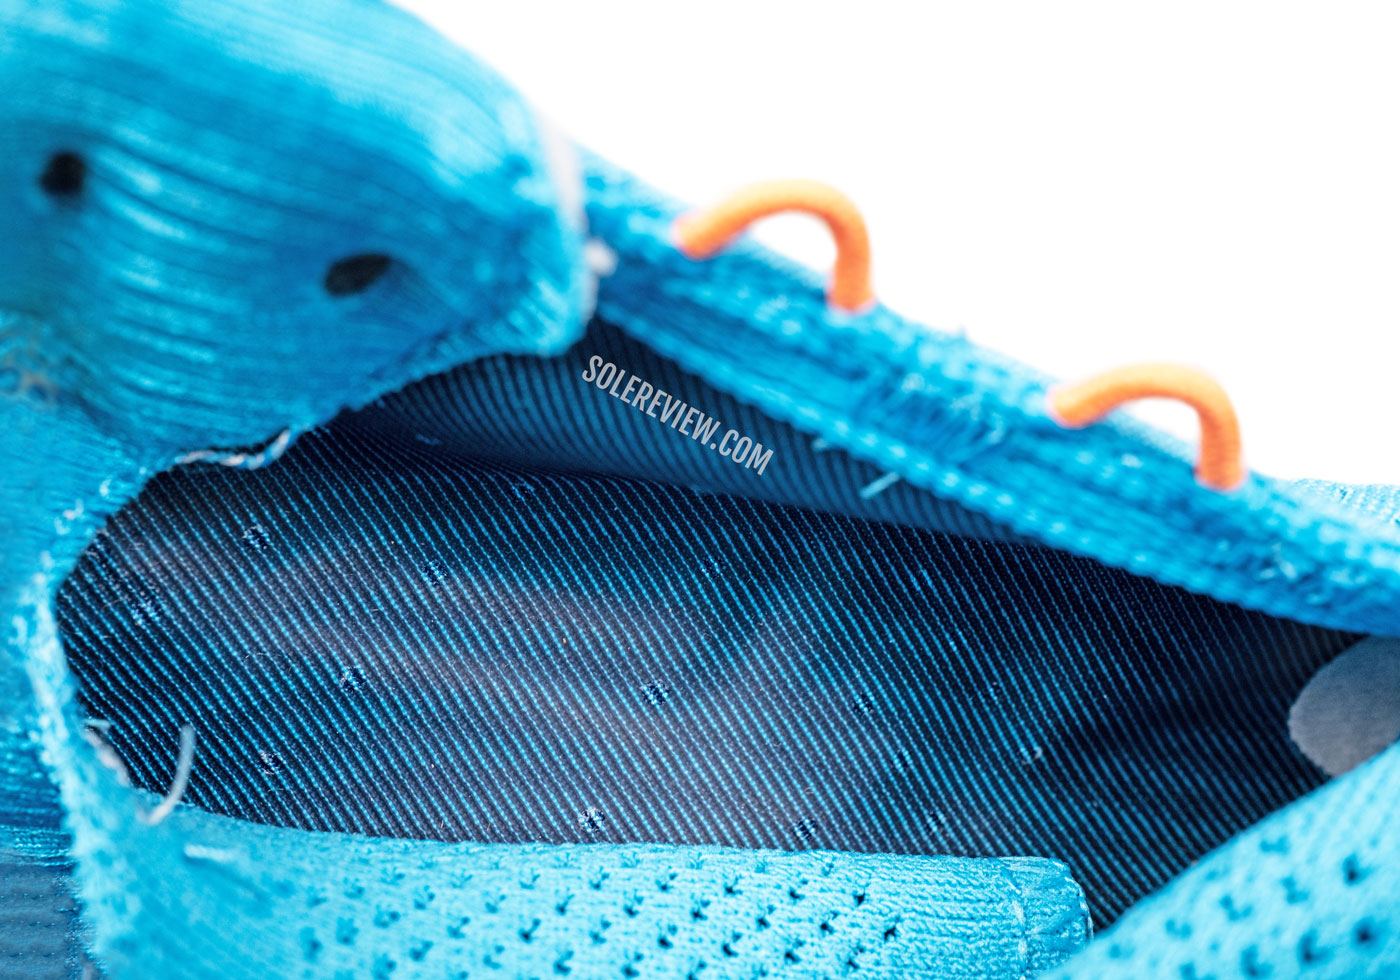 The midfoot lining of the Asics Nimbus 25.